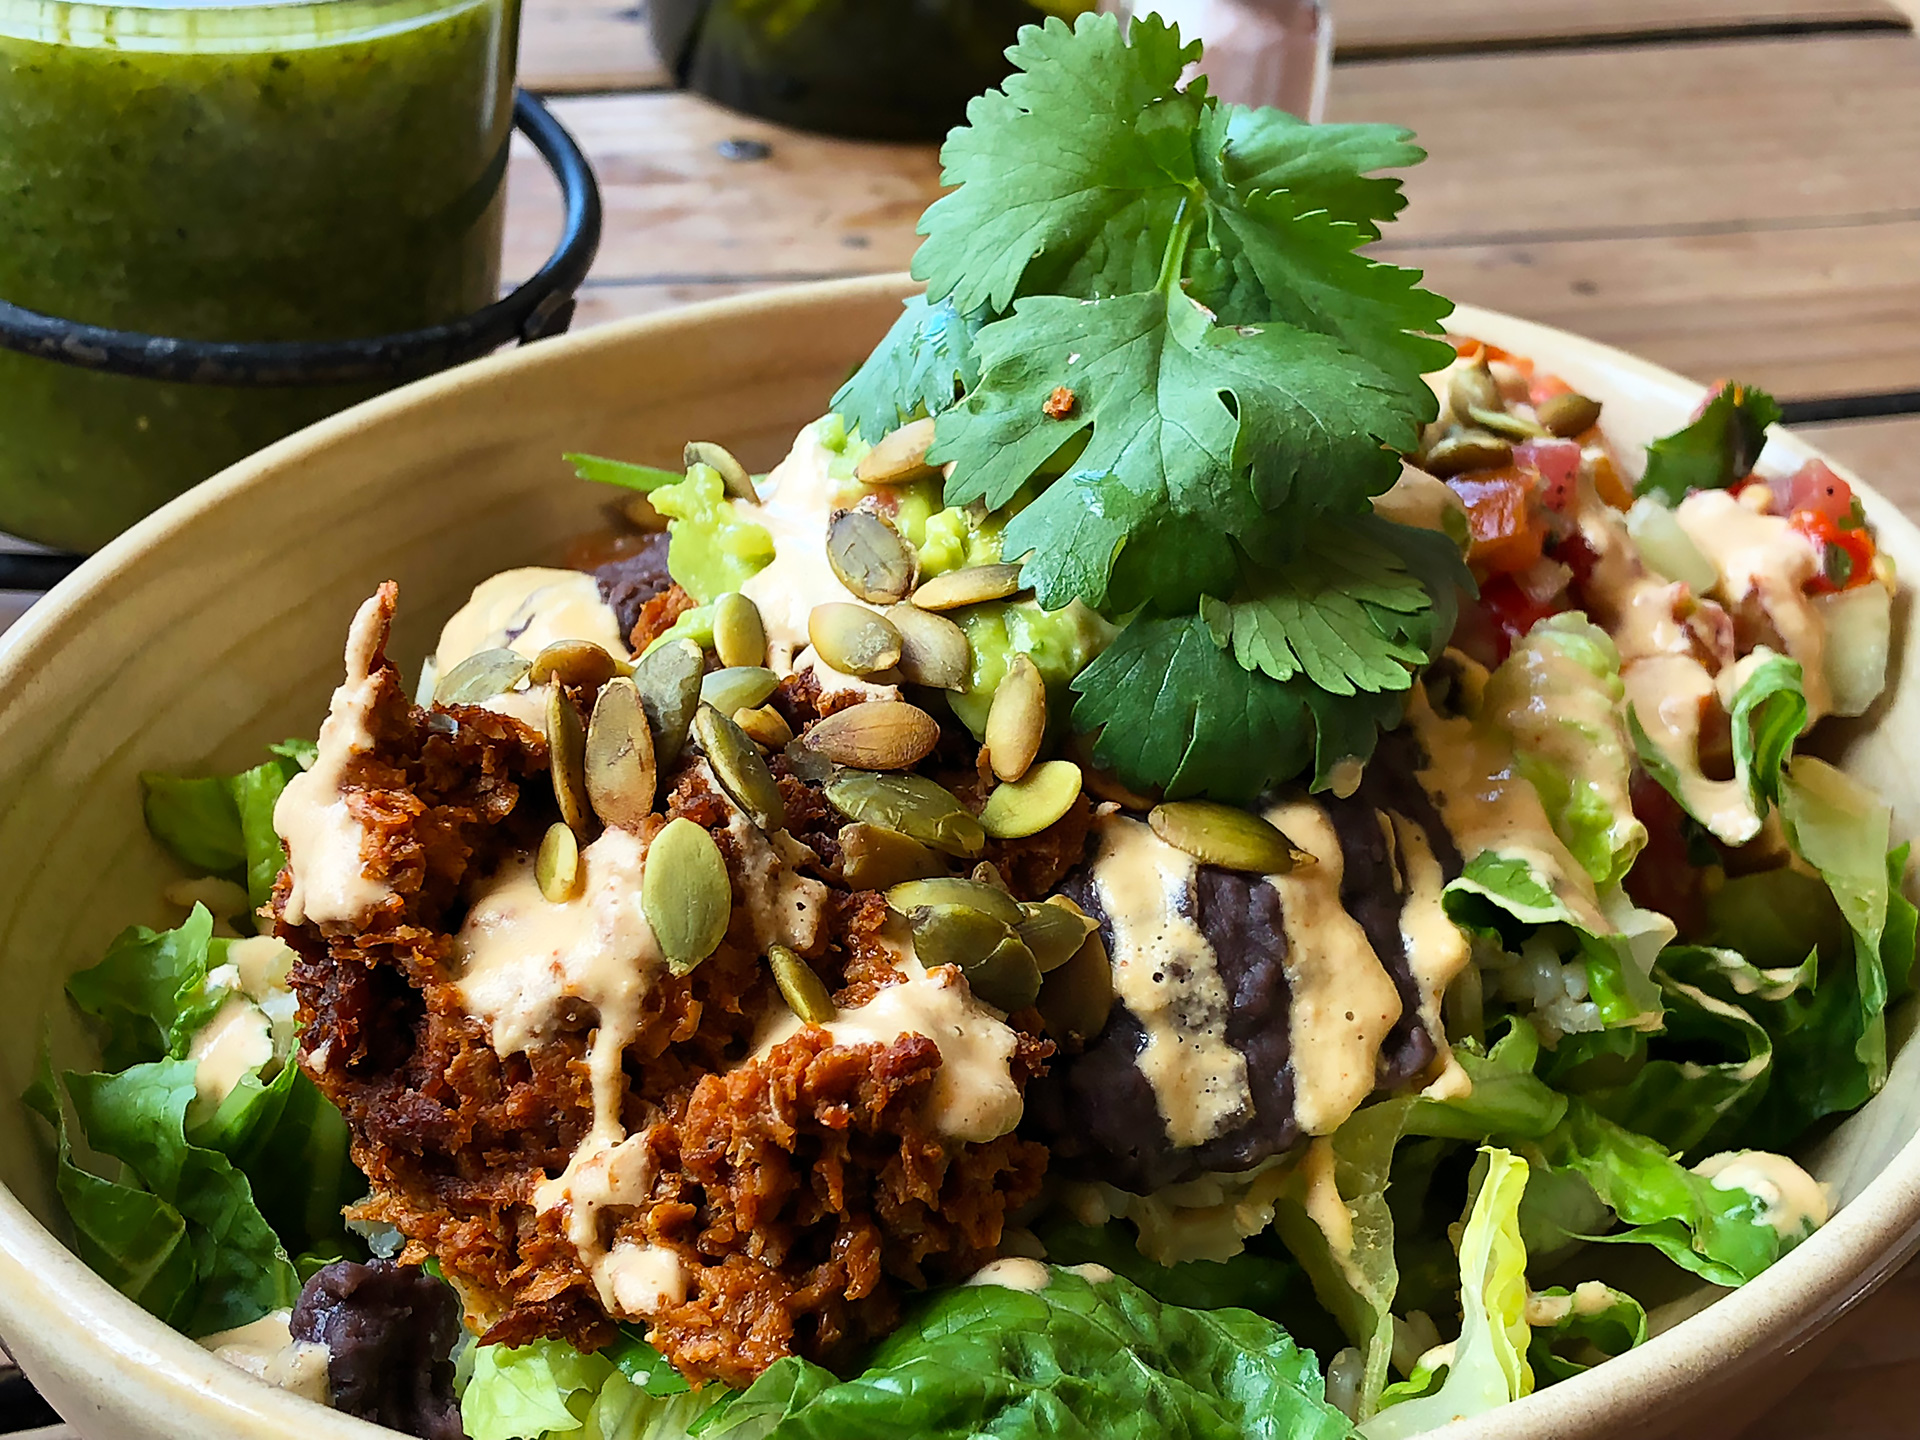 Bowl Uno: Tempeh chorizo, black beans, guacamole, brown rice and pico de gallo served on a bed of romaine and topped with nacho cashew cheese and pepitas. ($15)